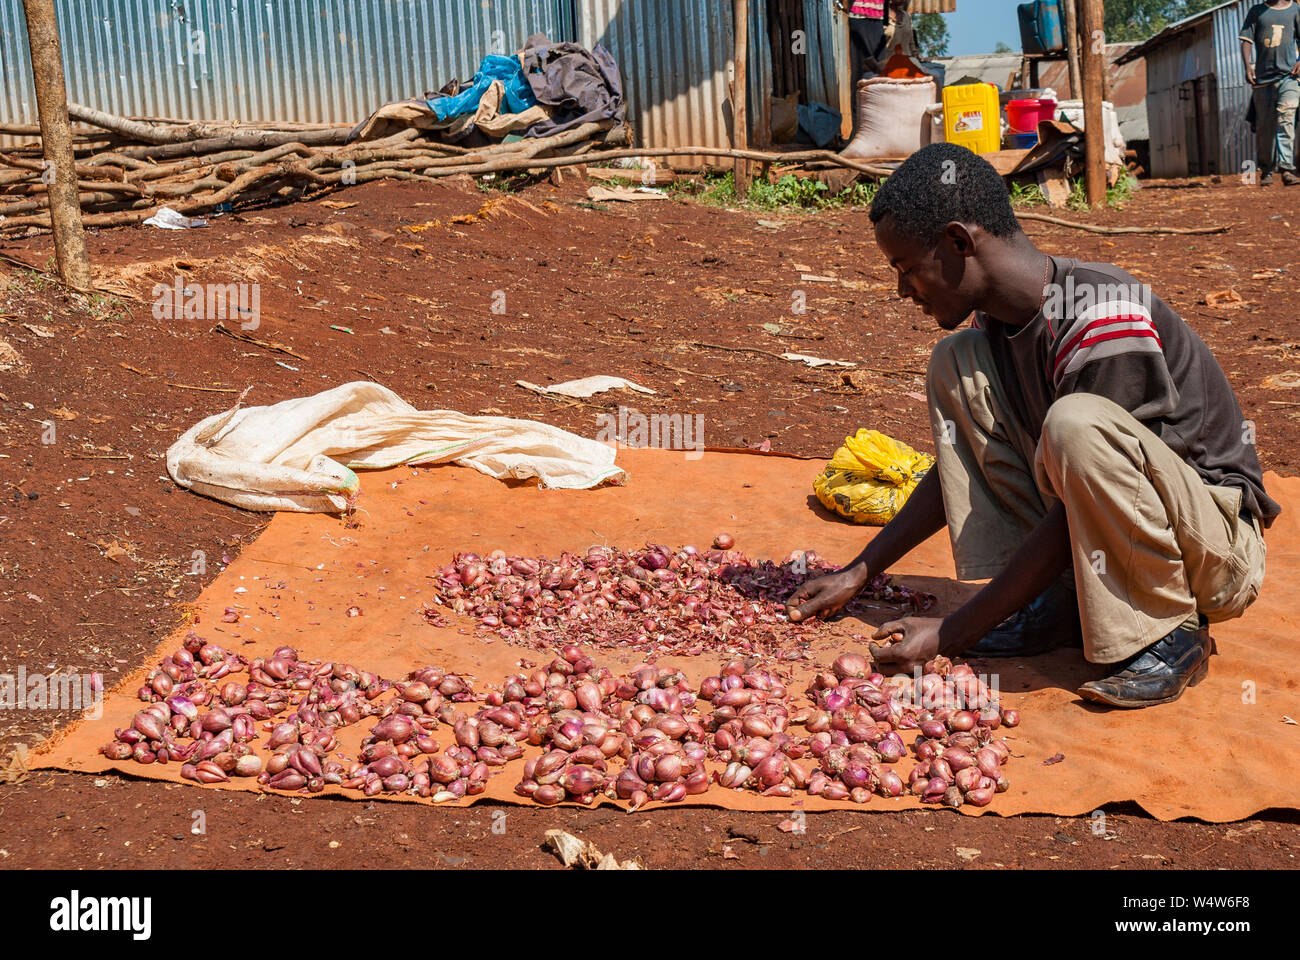 Man arranging home produced onions on a mat in a rural market in Western Ethiopia Stock Photo